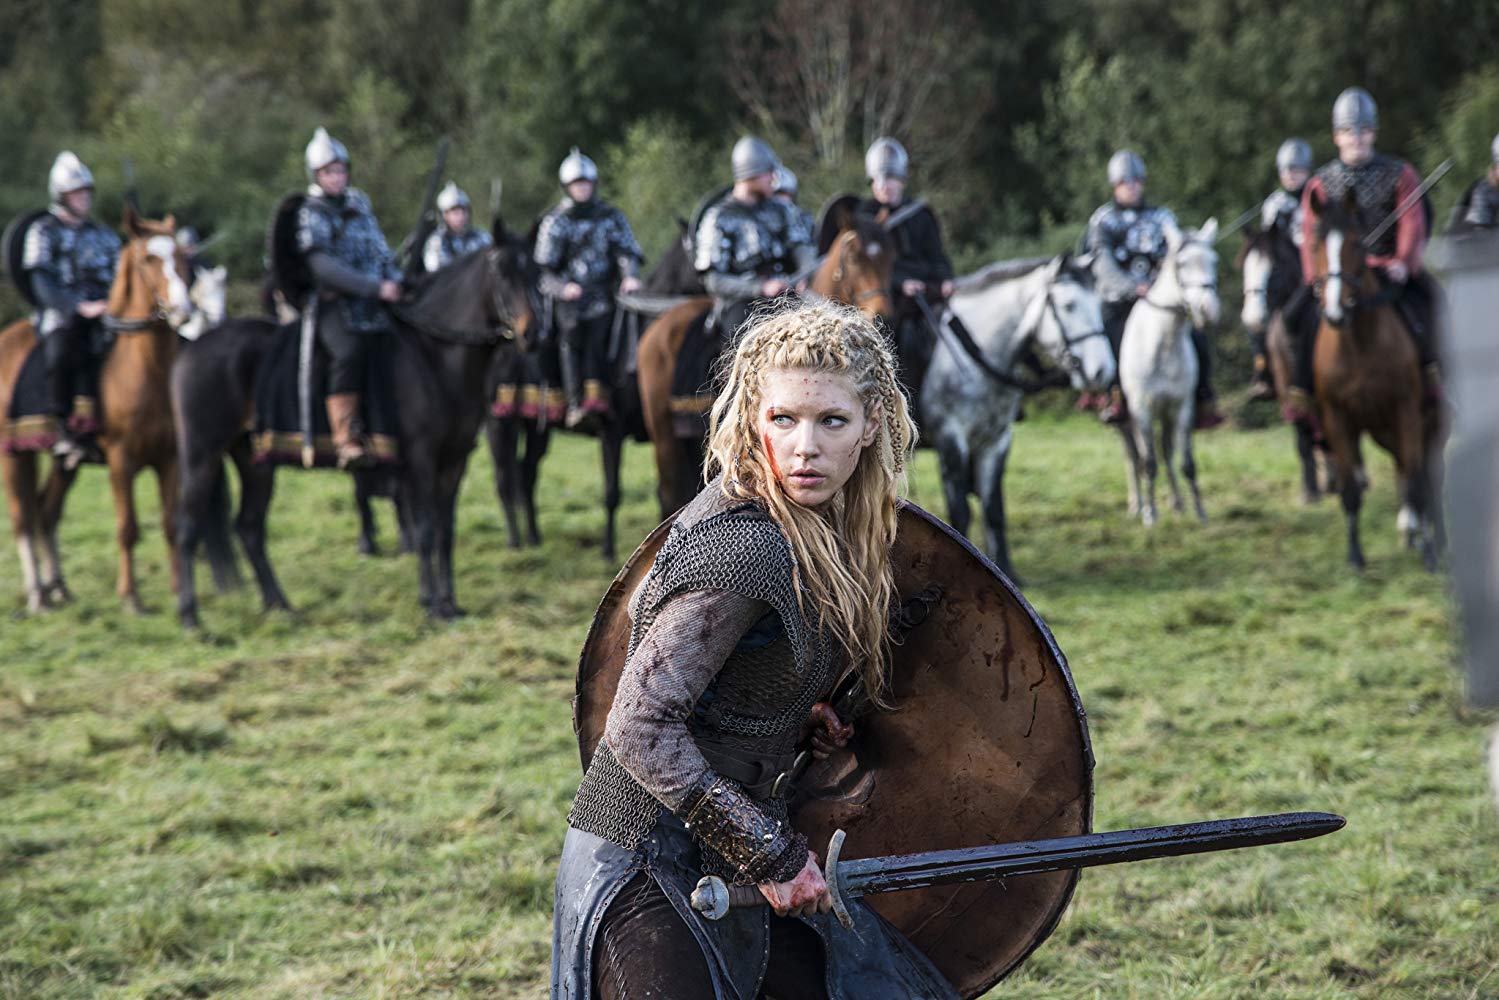 I Photographed My Wife as the Viking Shieldmaiden Lagertha